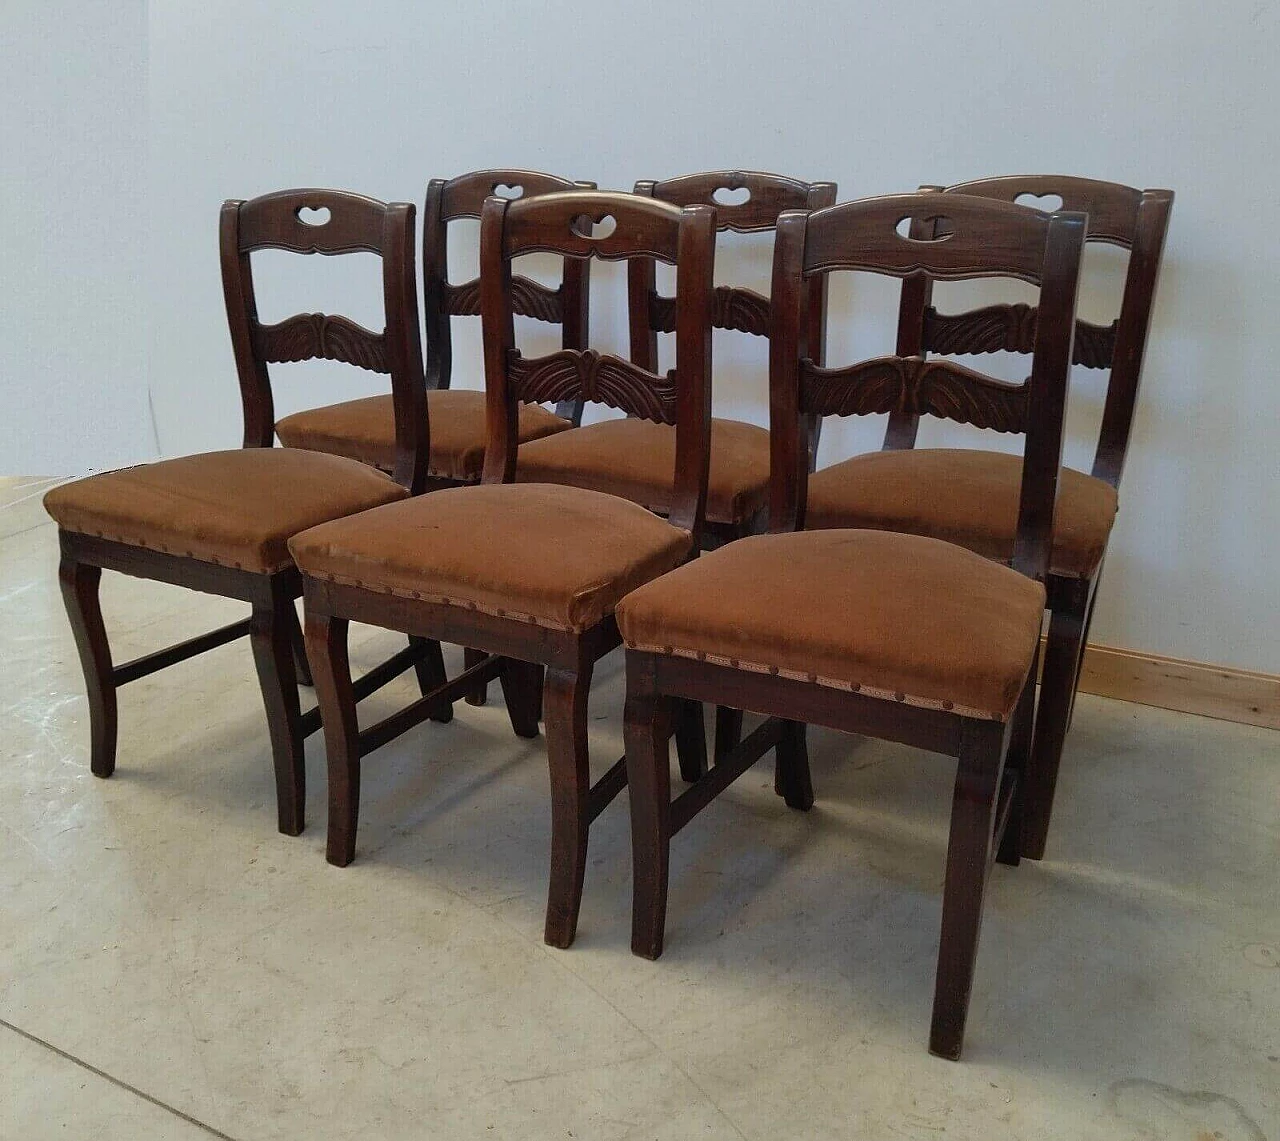 6 Empire-style walnut chairs, early 19th century 3